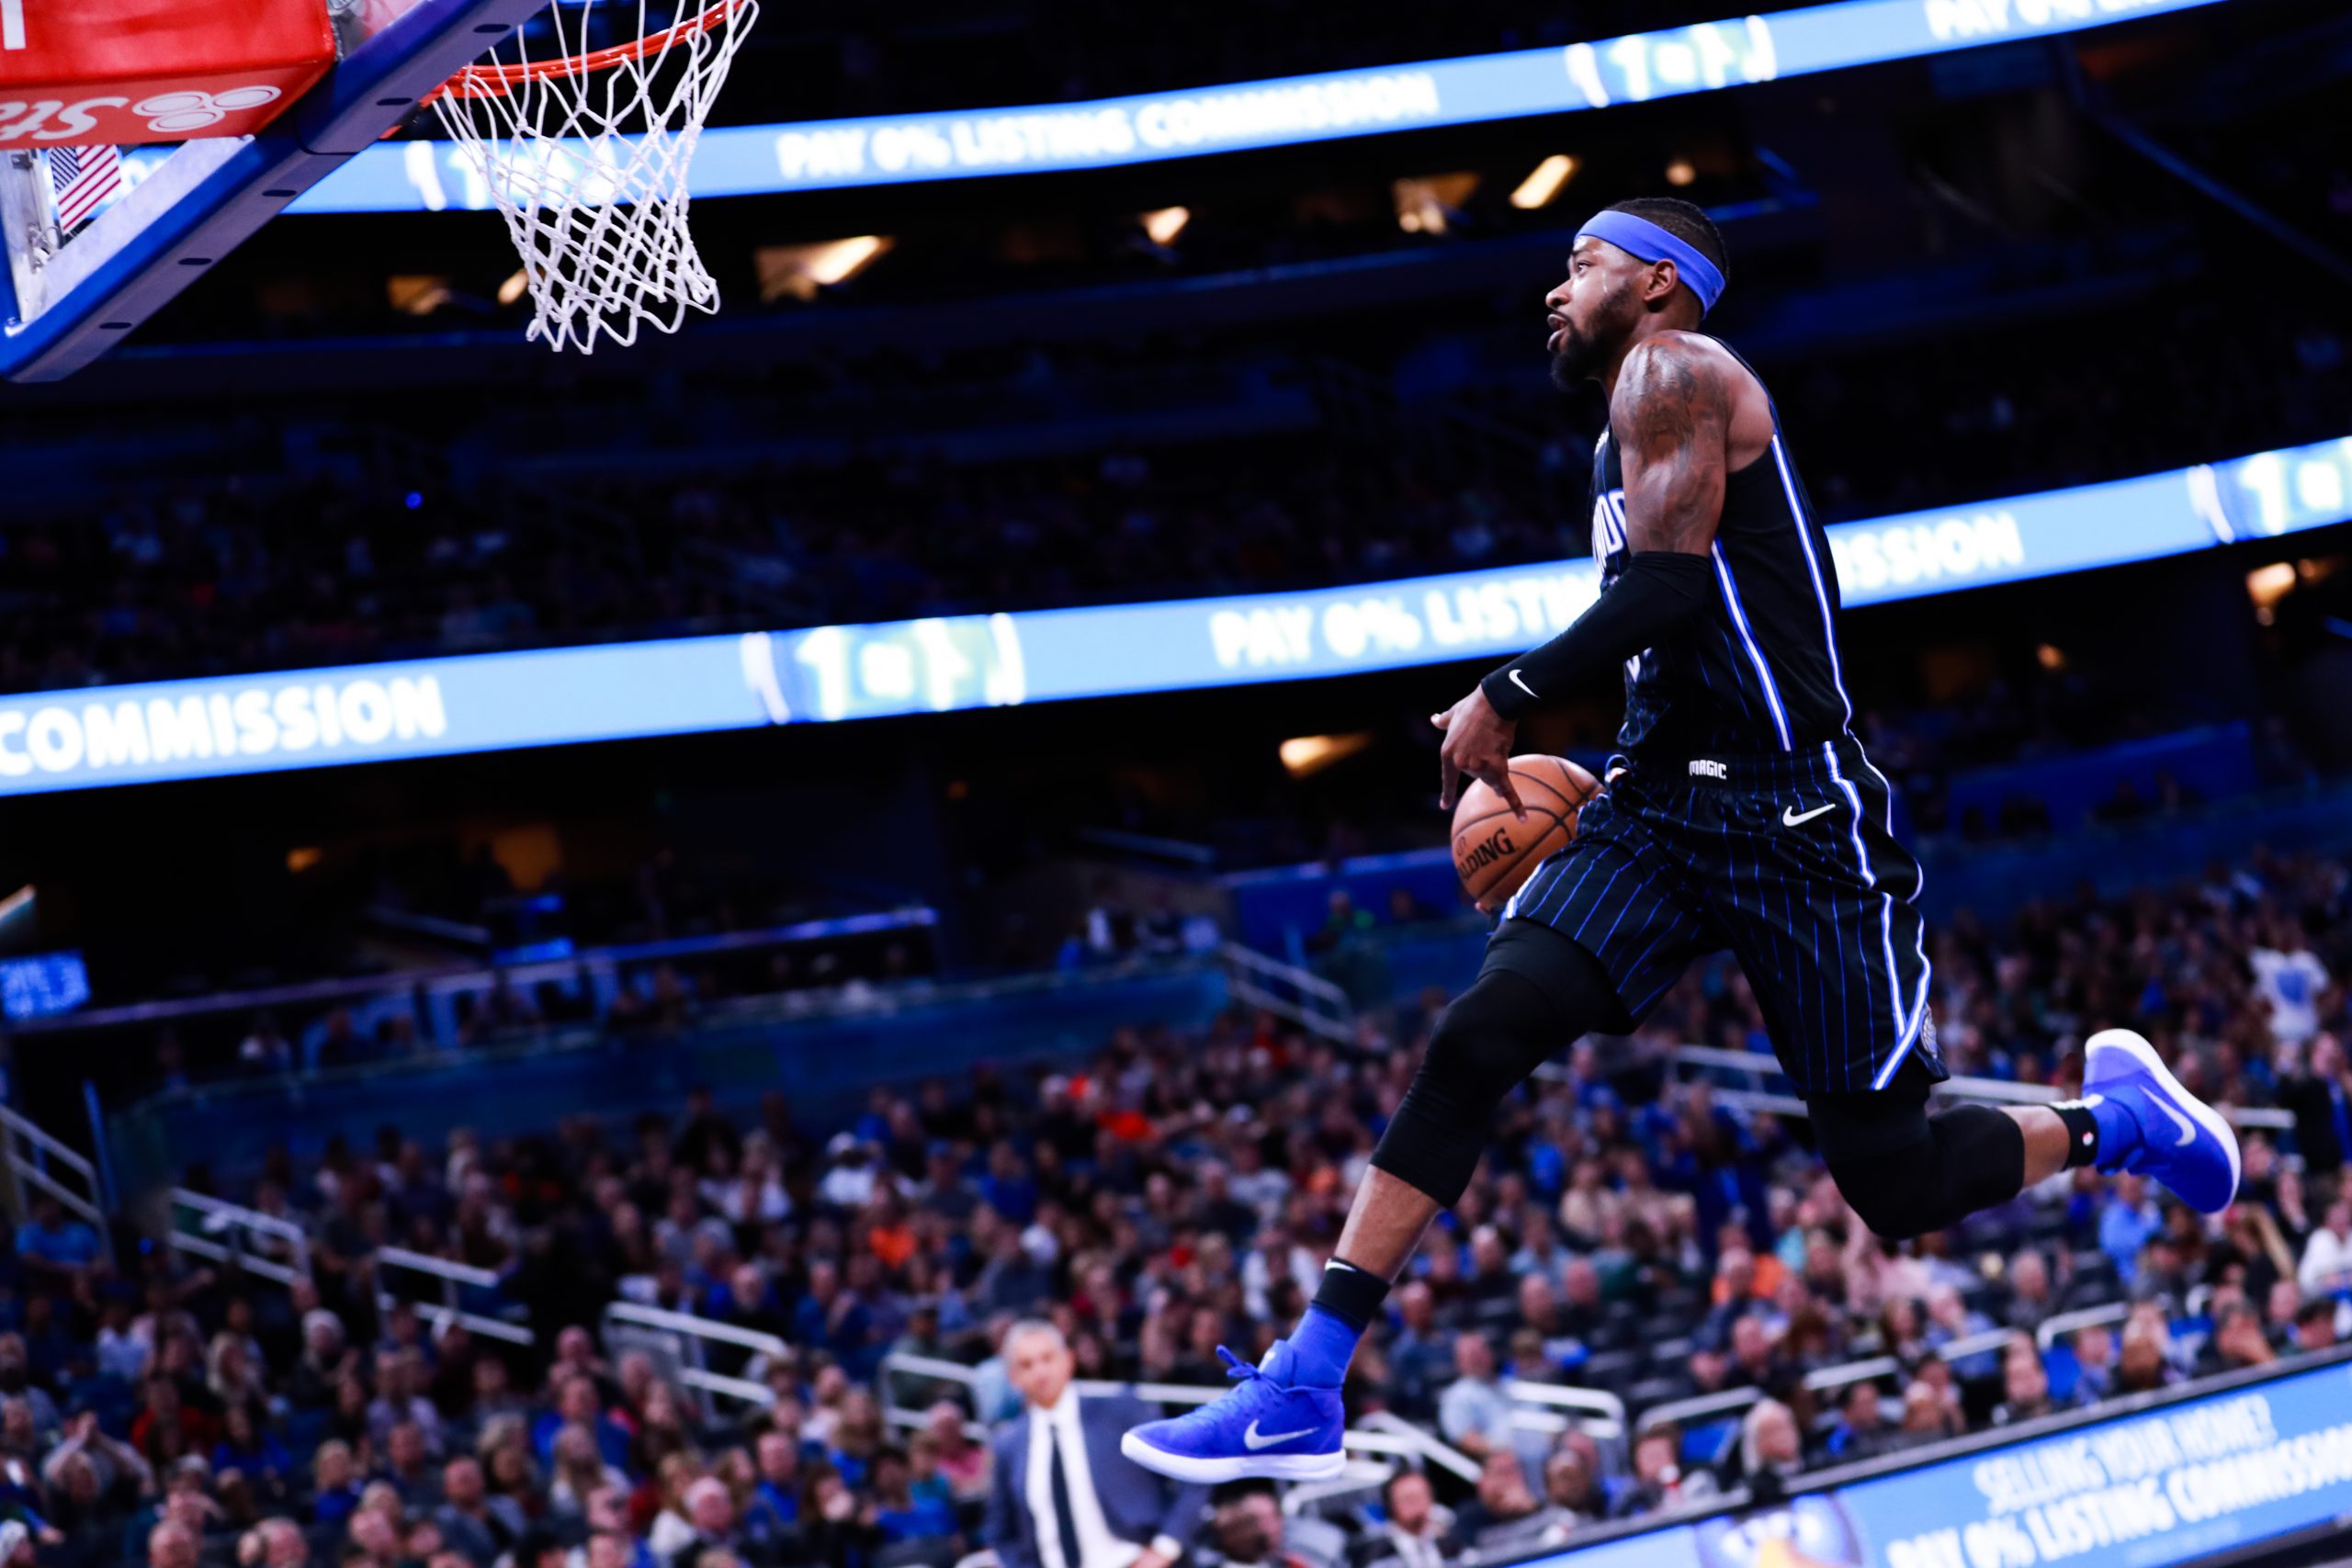 Orlando Magic stellar reserve guard Terrence Ross goes in for a windmill dunk against the Phoenix Suns in the fourth quarter at Amway Center on December 26, 2018 in Orlando, Florida.